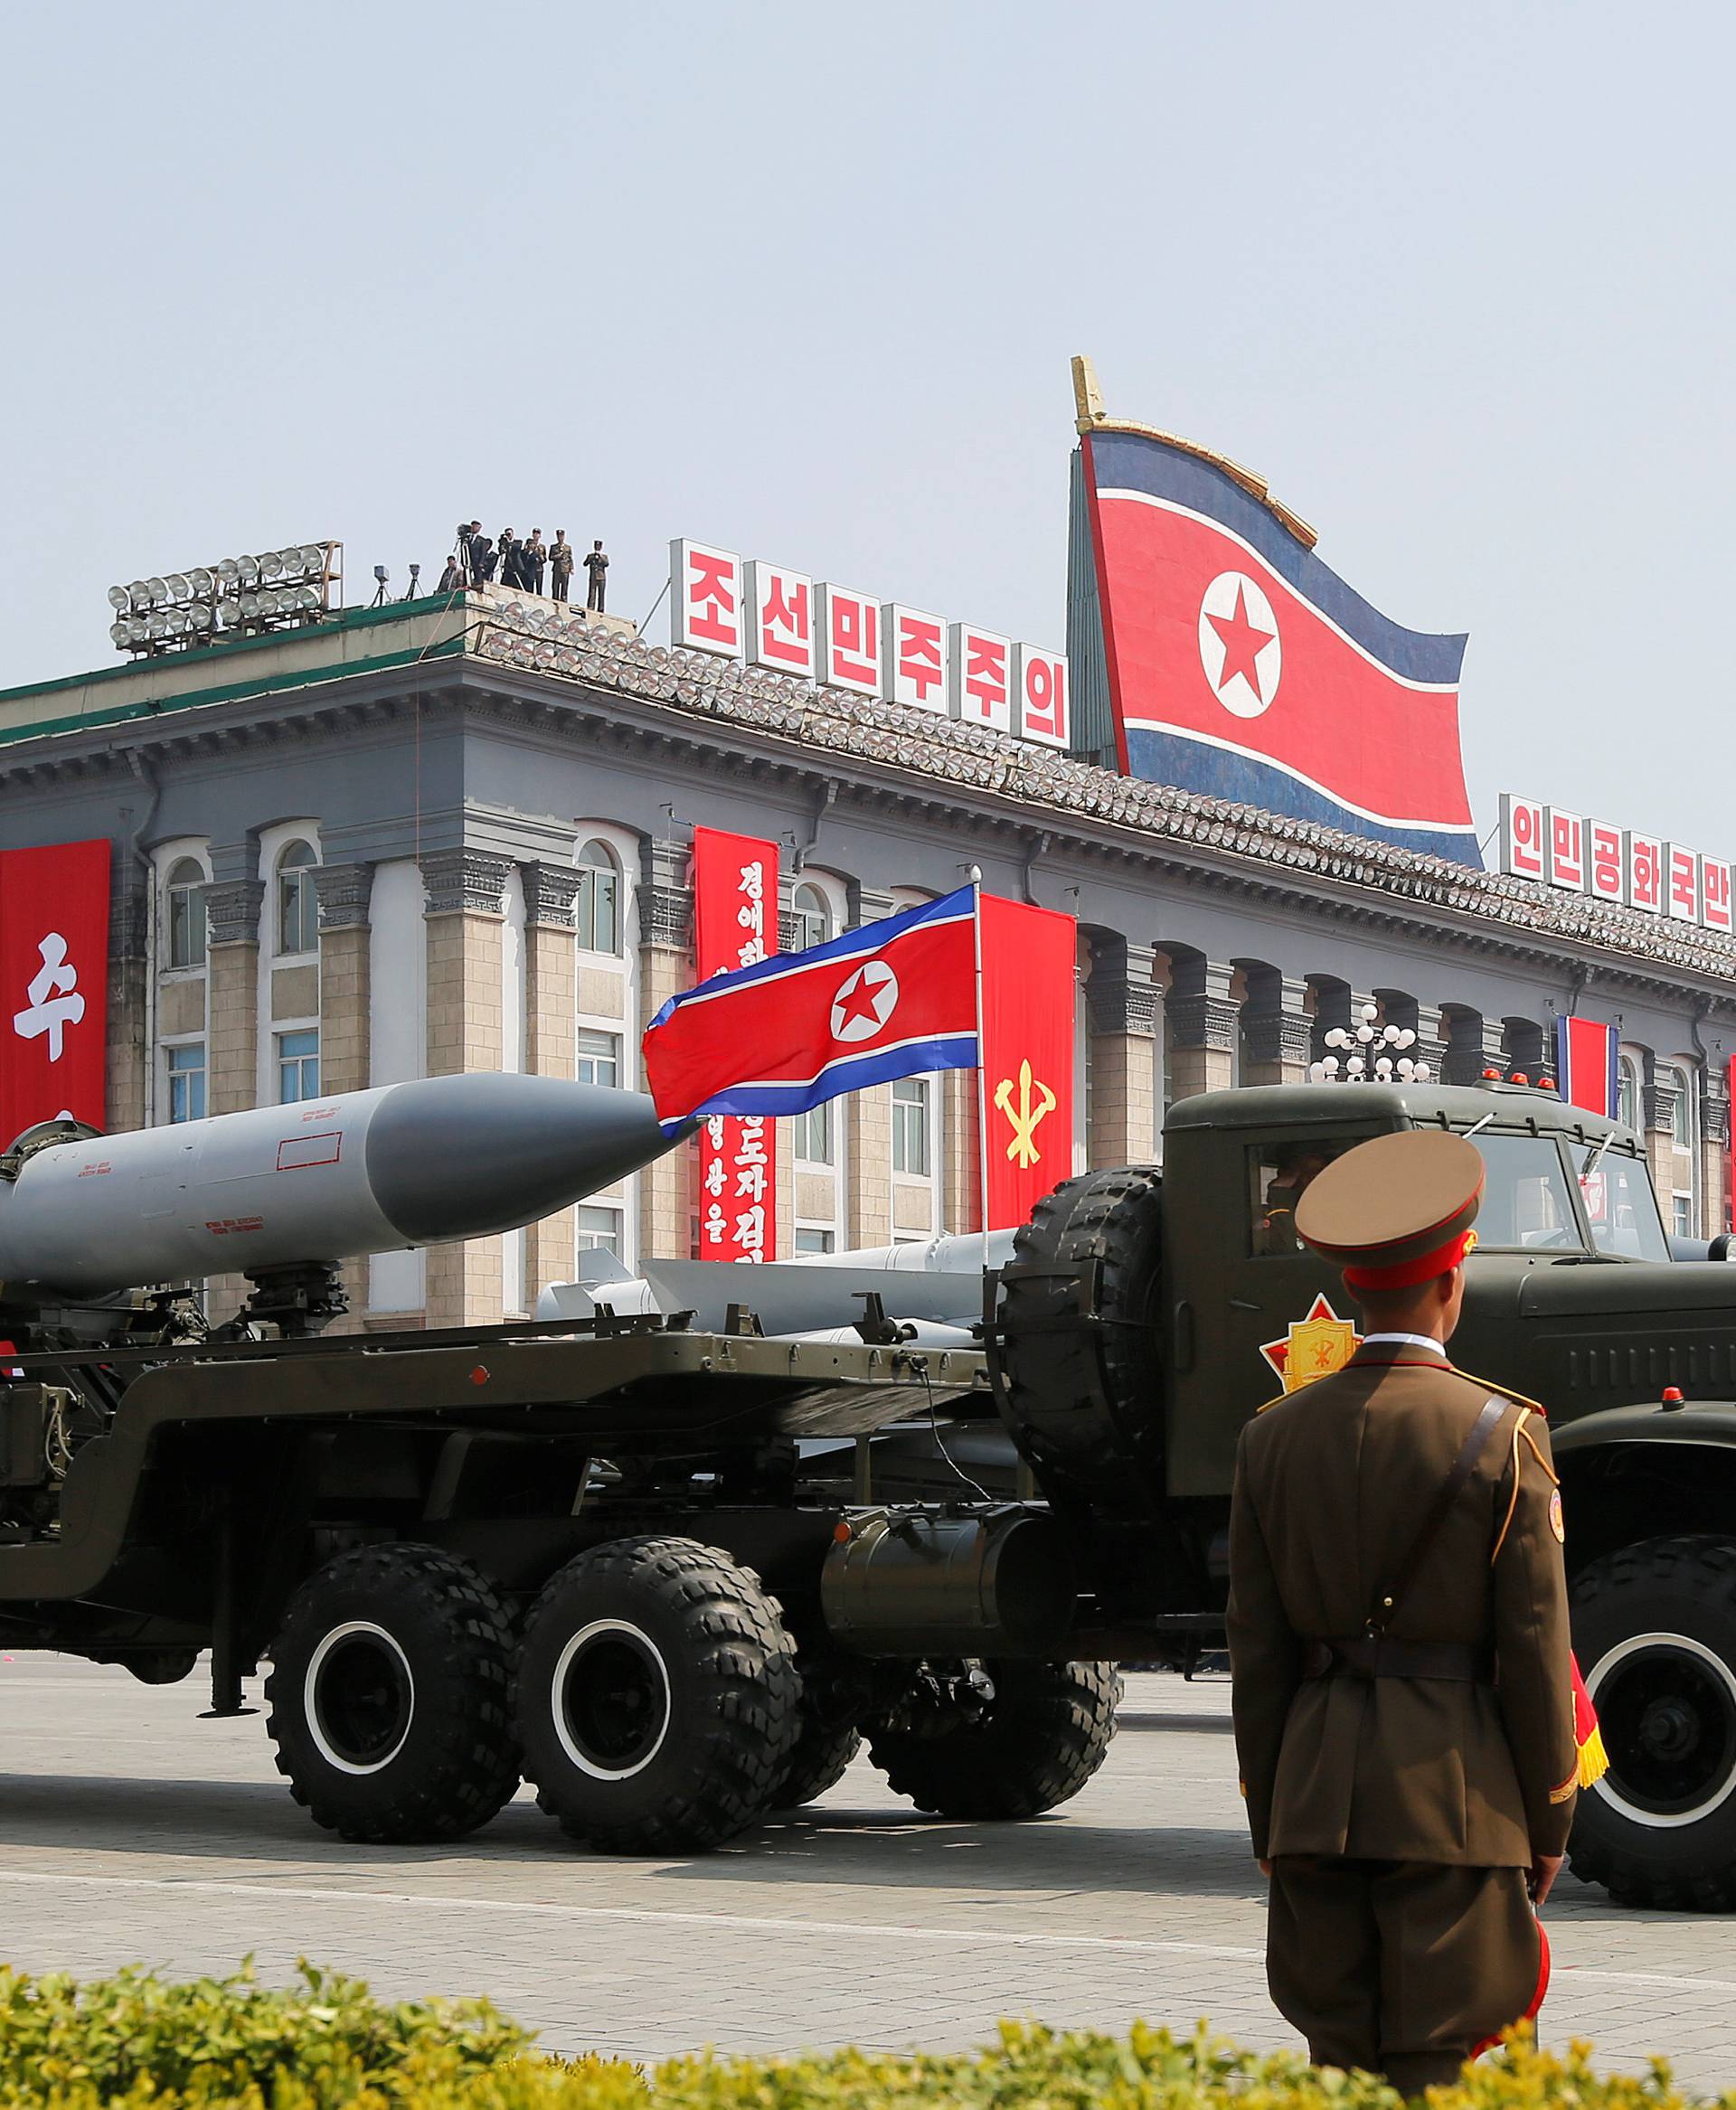 Missiles are driven past the stand with North Korean leader Kim Jong Un and other high ranking officials during a military parade marking the 105th birth anniversary of North Korea's founding father, Kim Il Sung, in Pyongyang